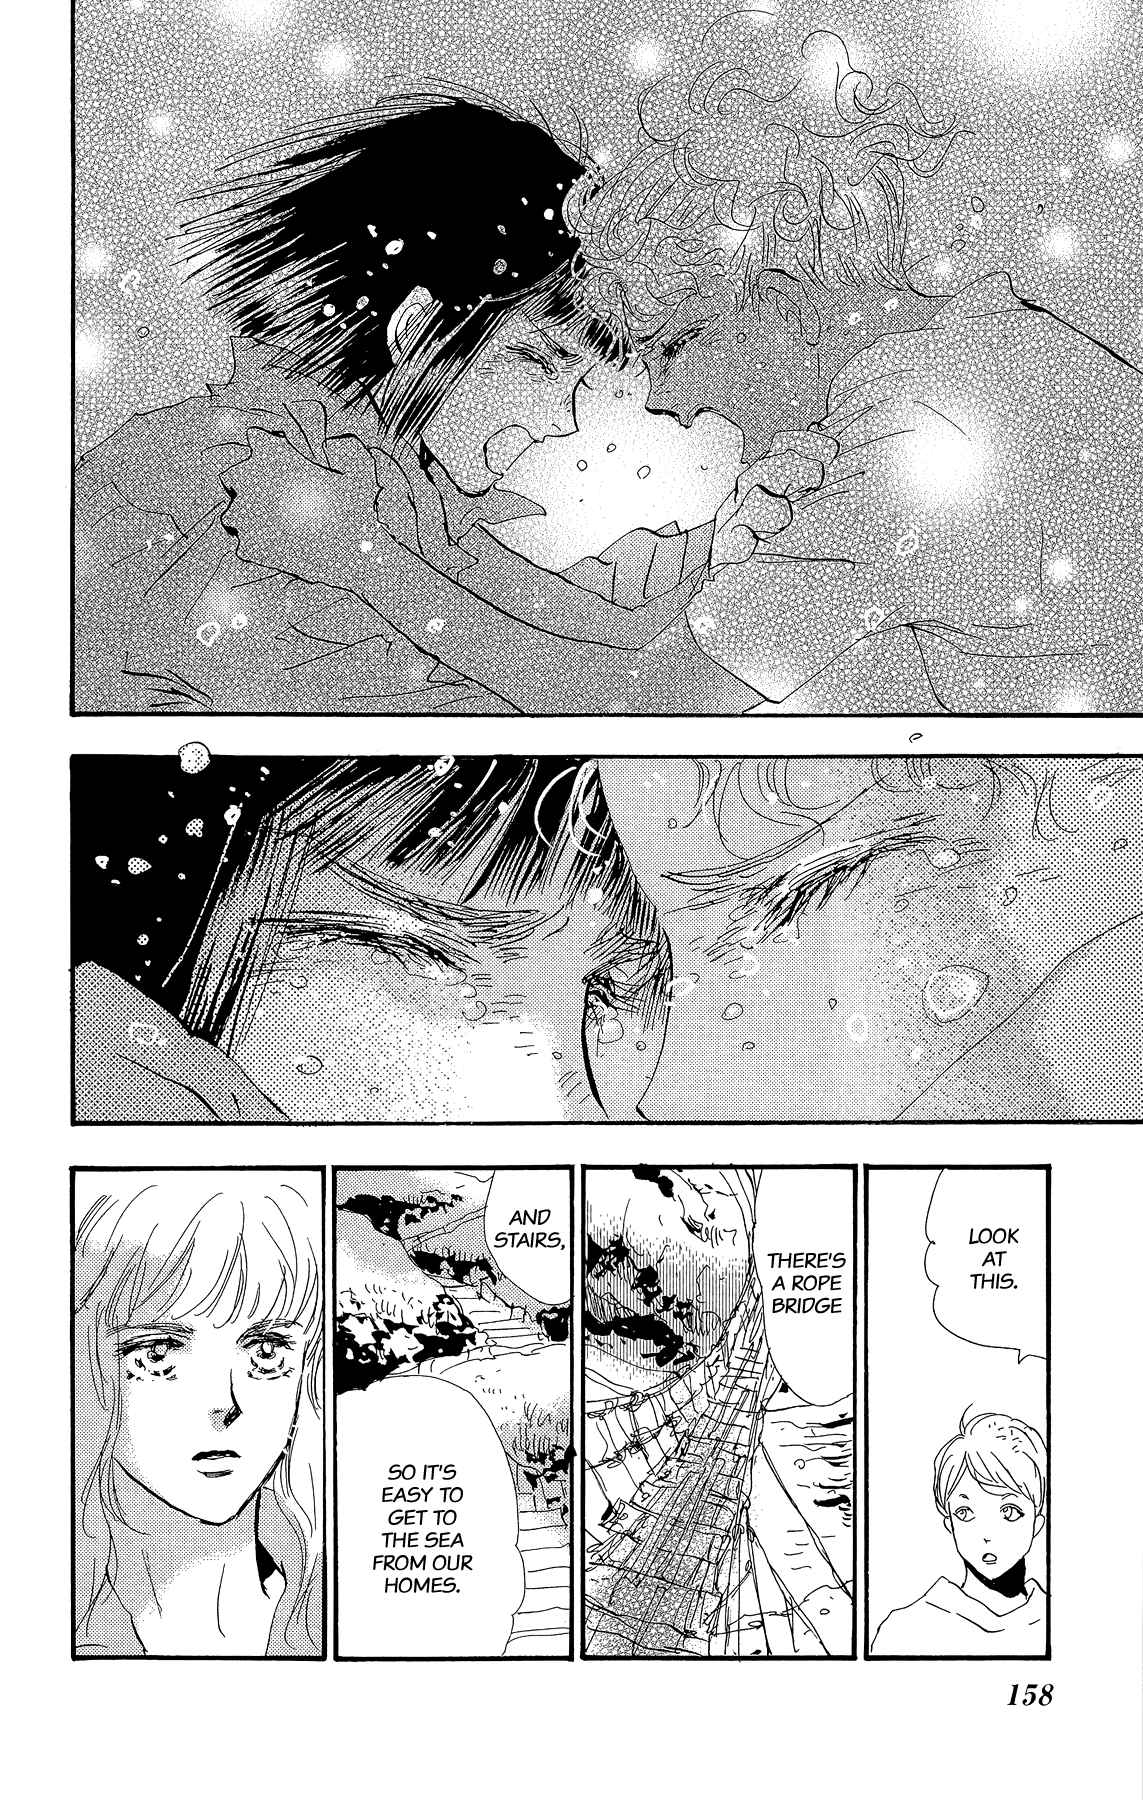 7 Seeds Gaiden Vol. 1 Ch. 3 Conclusion [To The Future]